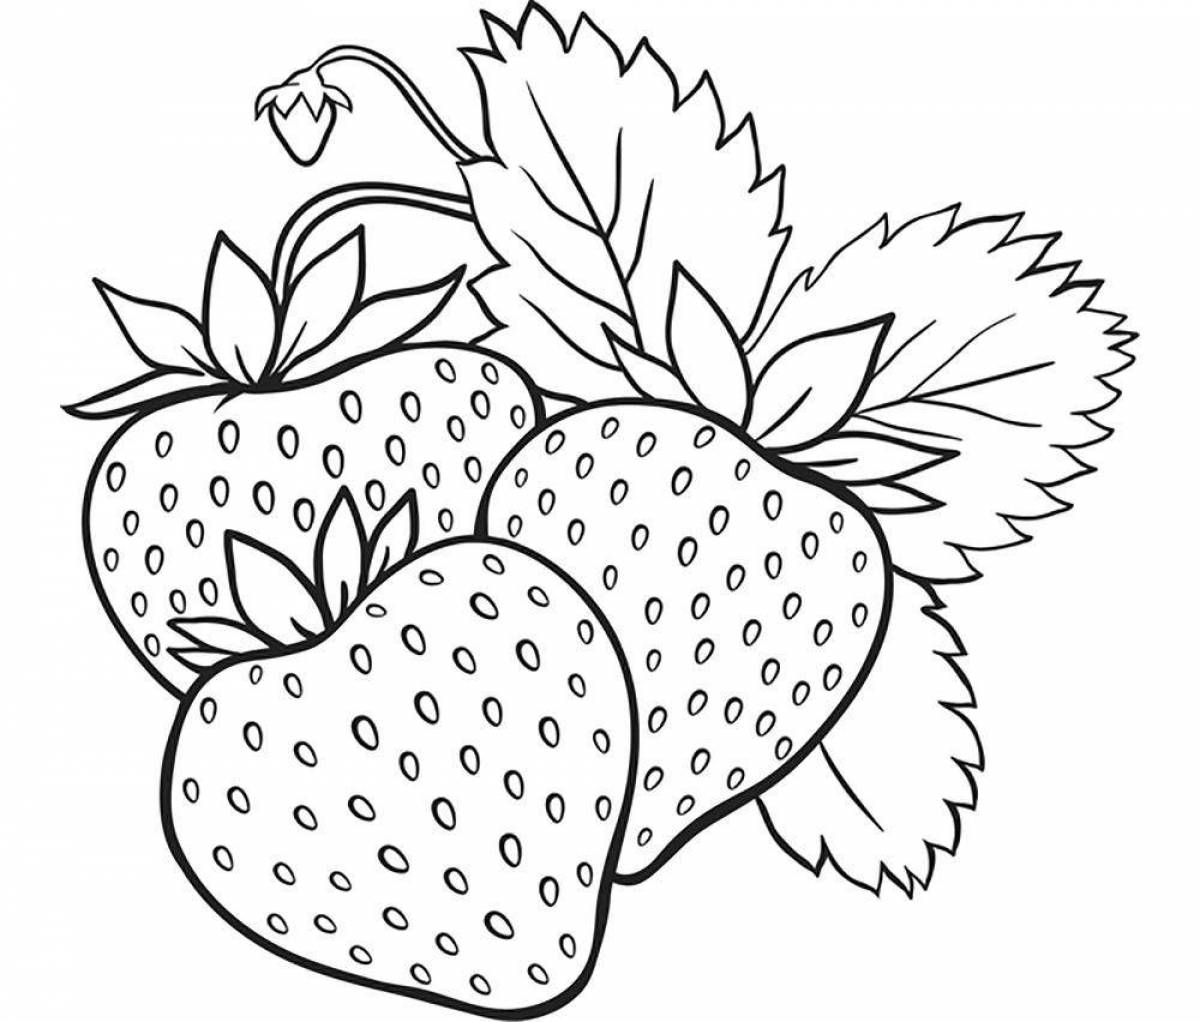 Charming berries and fruits coloring book